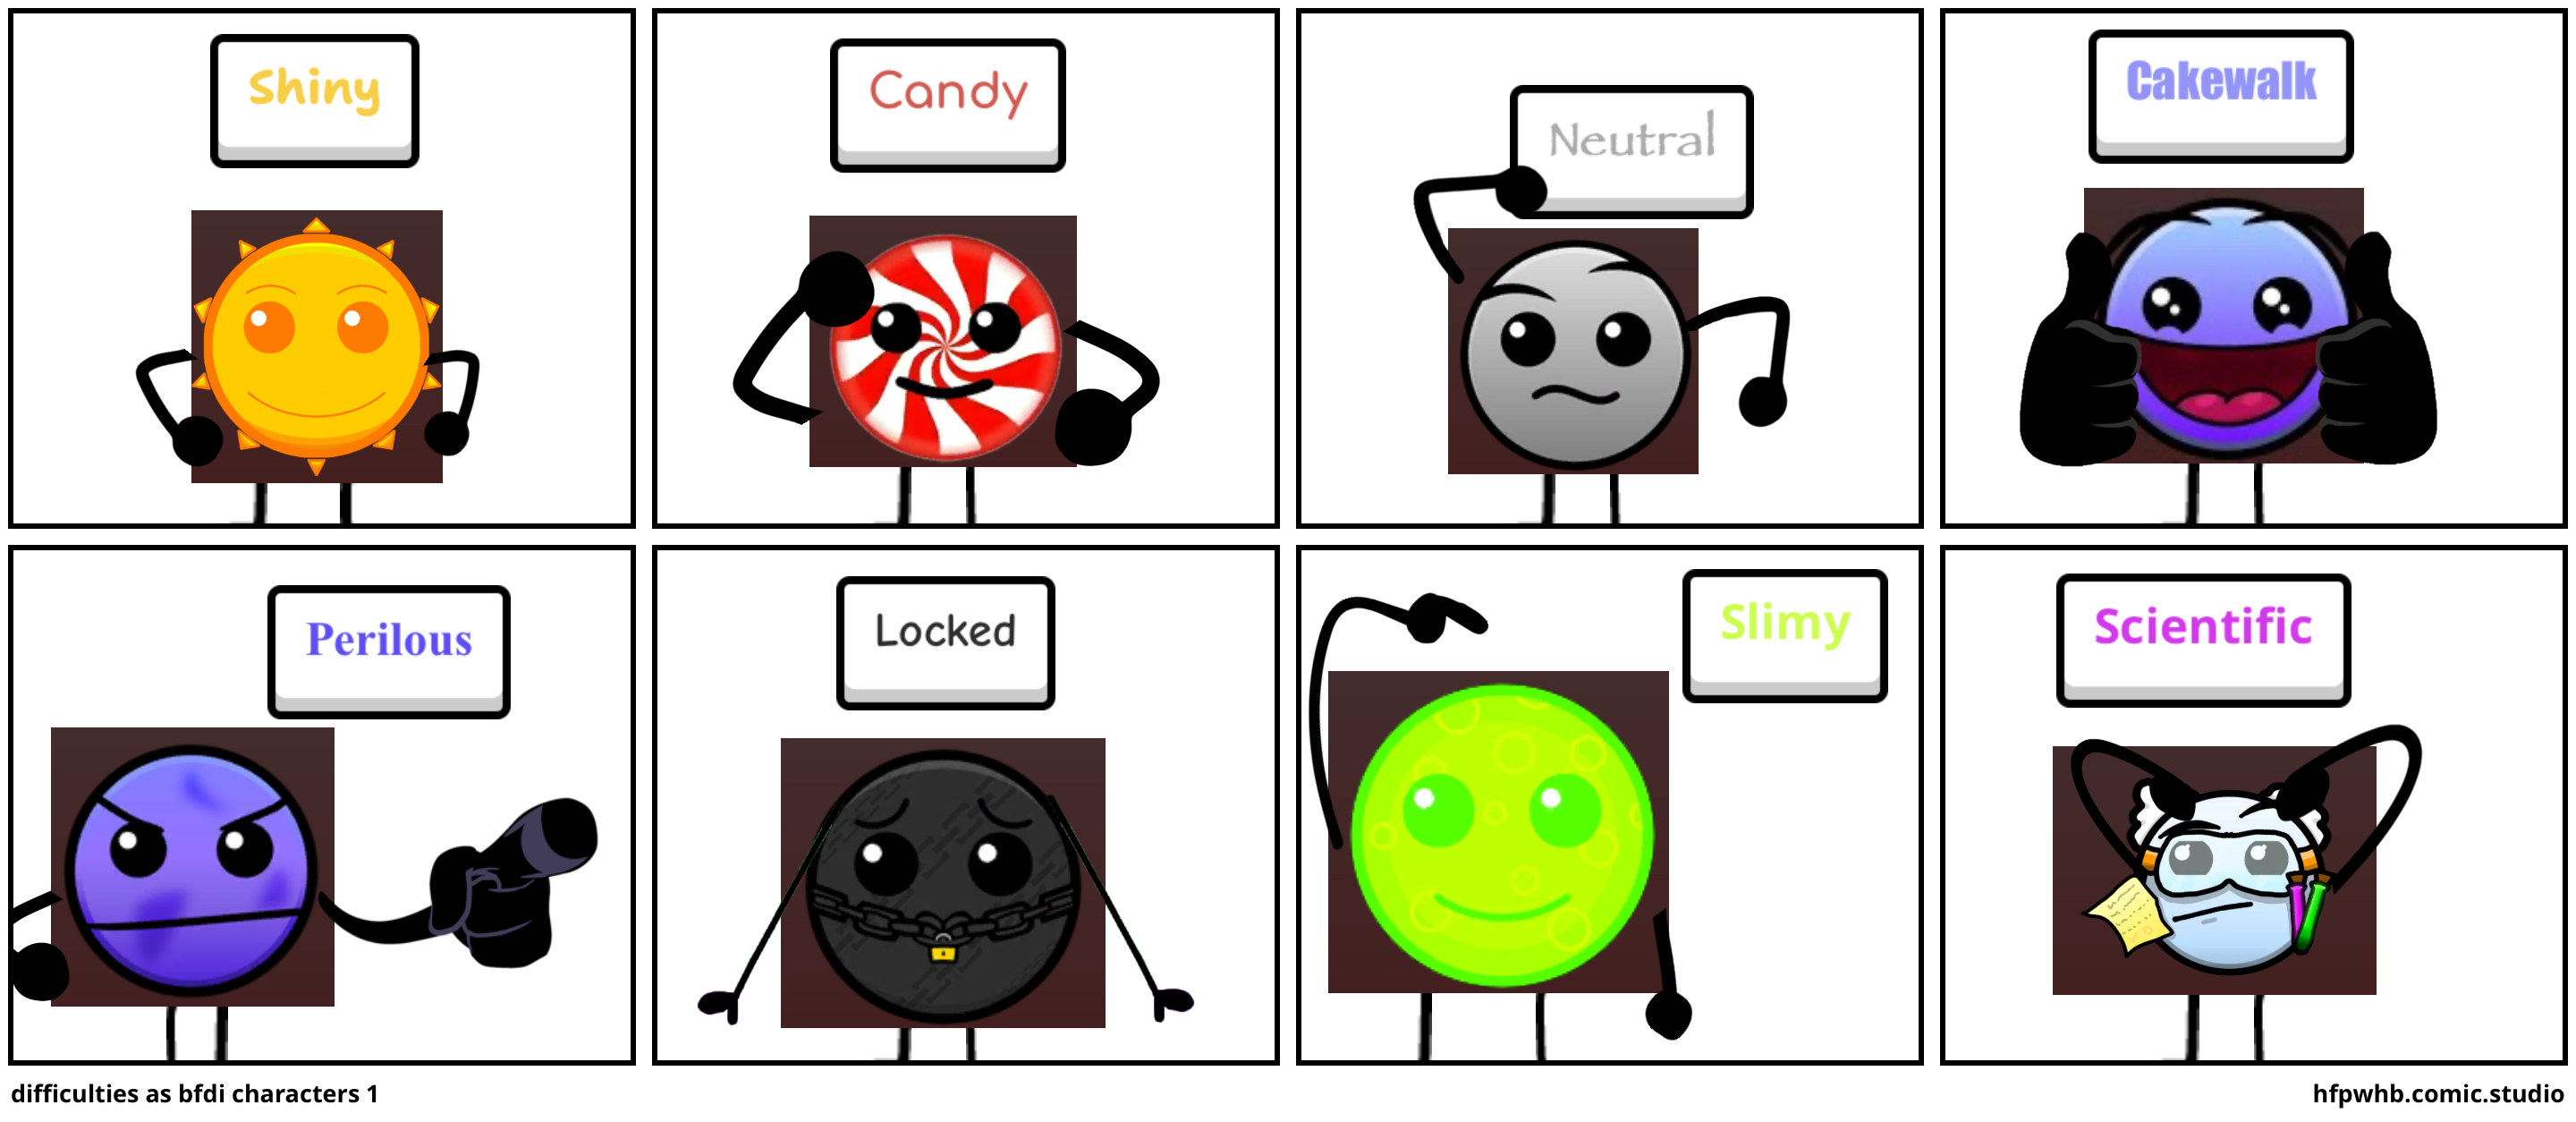 difficulties as bfdi characters 1